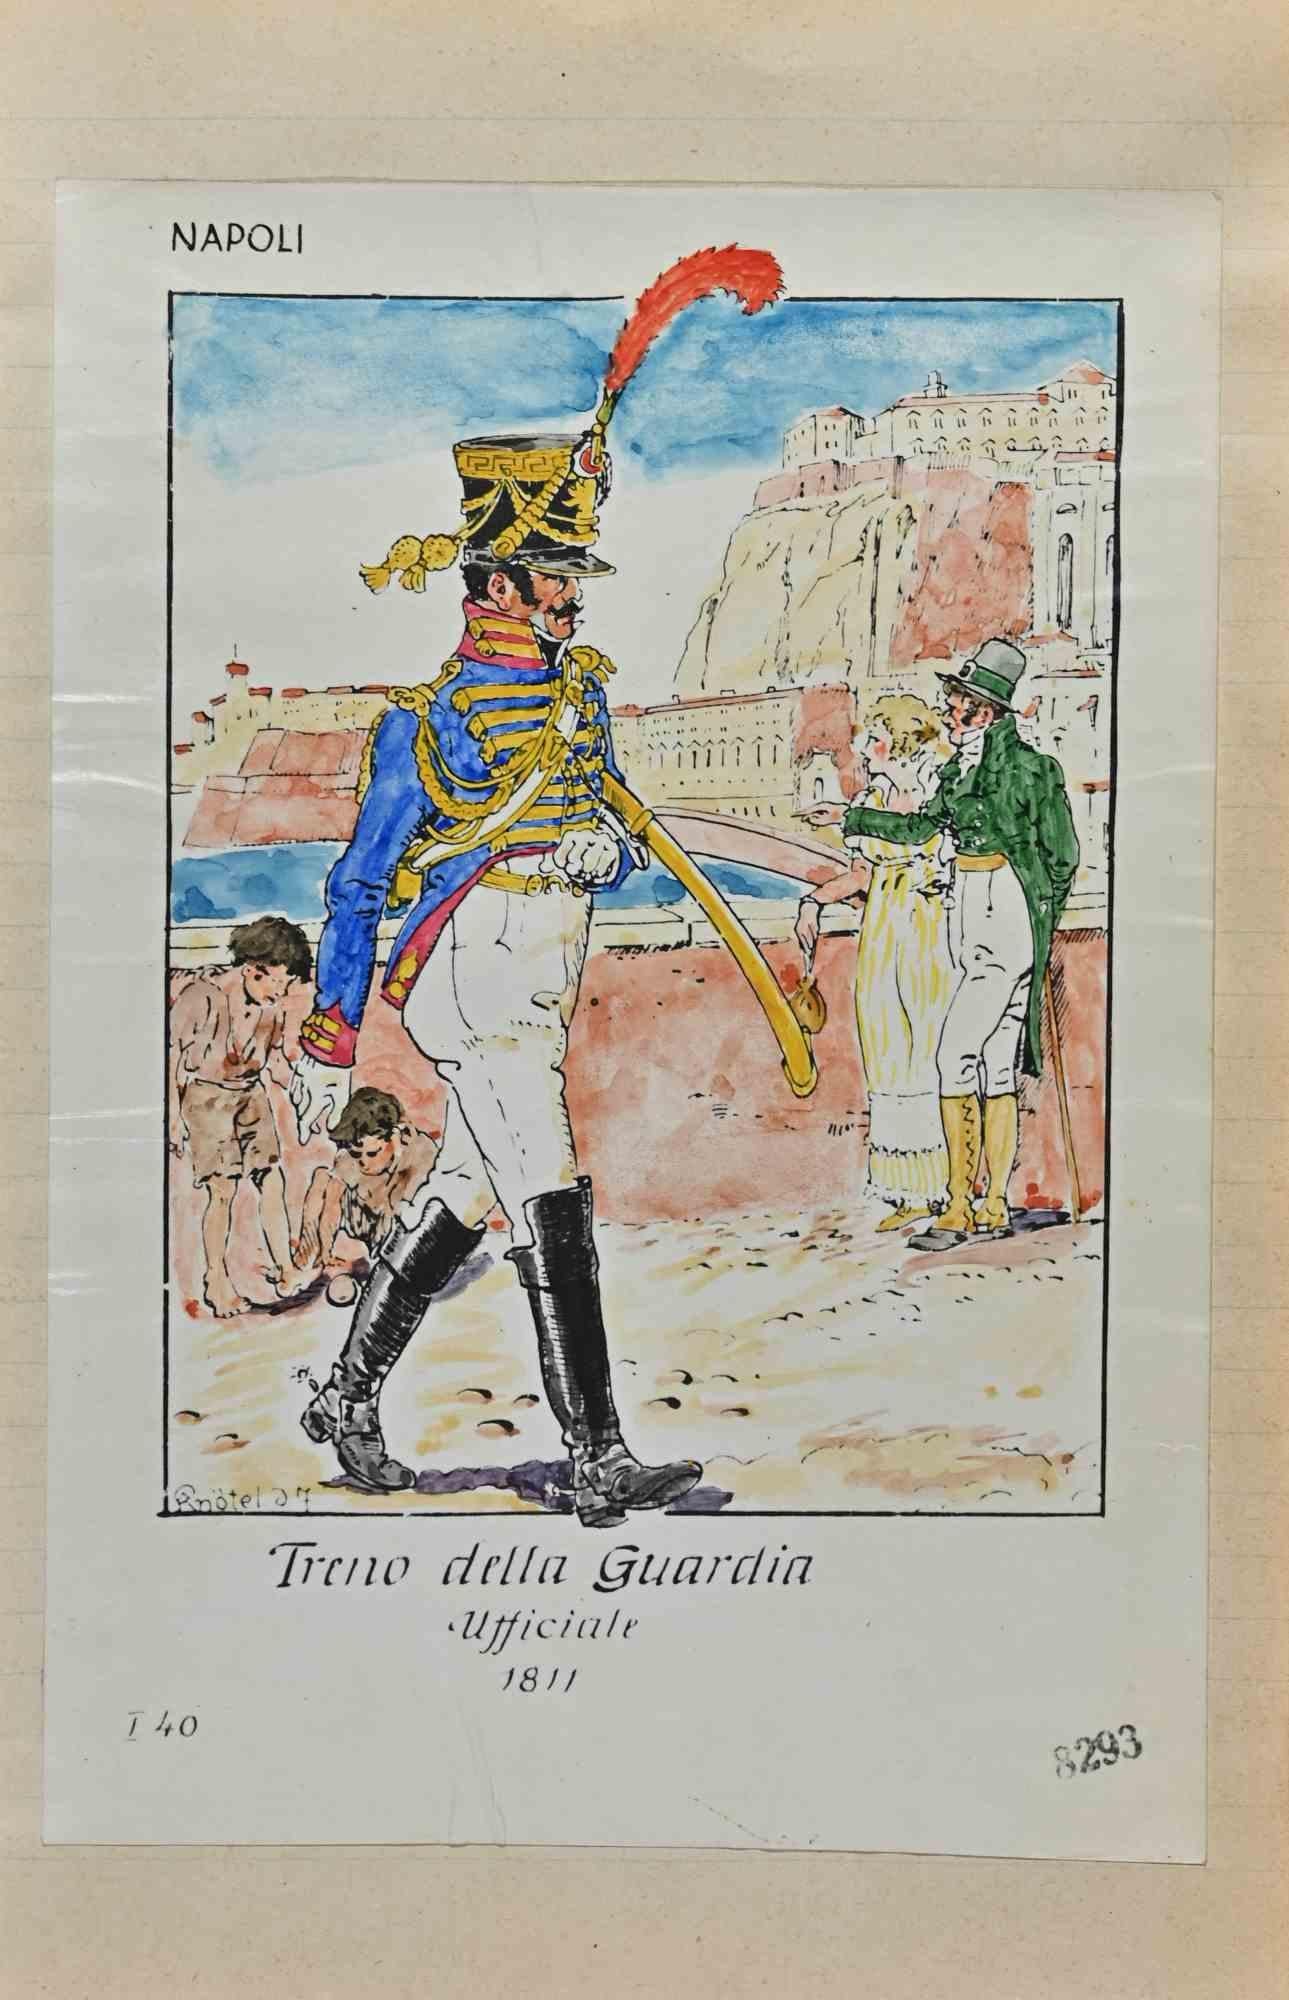 Treno della Guardia is an original drawing in ink and watercolor realized by Herbert Knotel in 1930/40s.

Good condition except for being aged.

The artwork is depicted through strong lines in well-balanced conditions.

Herbert Knotel was a german